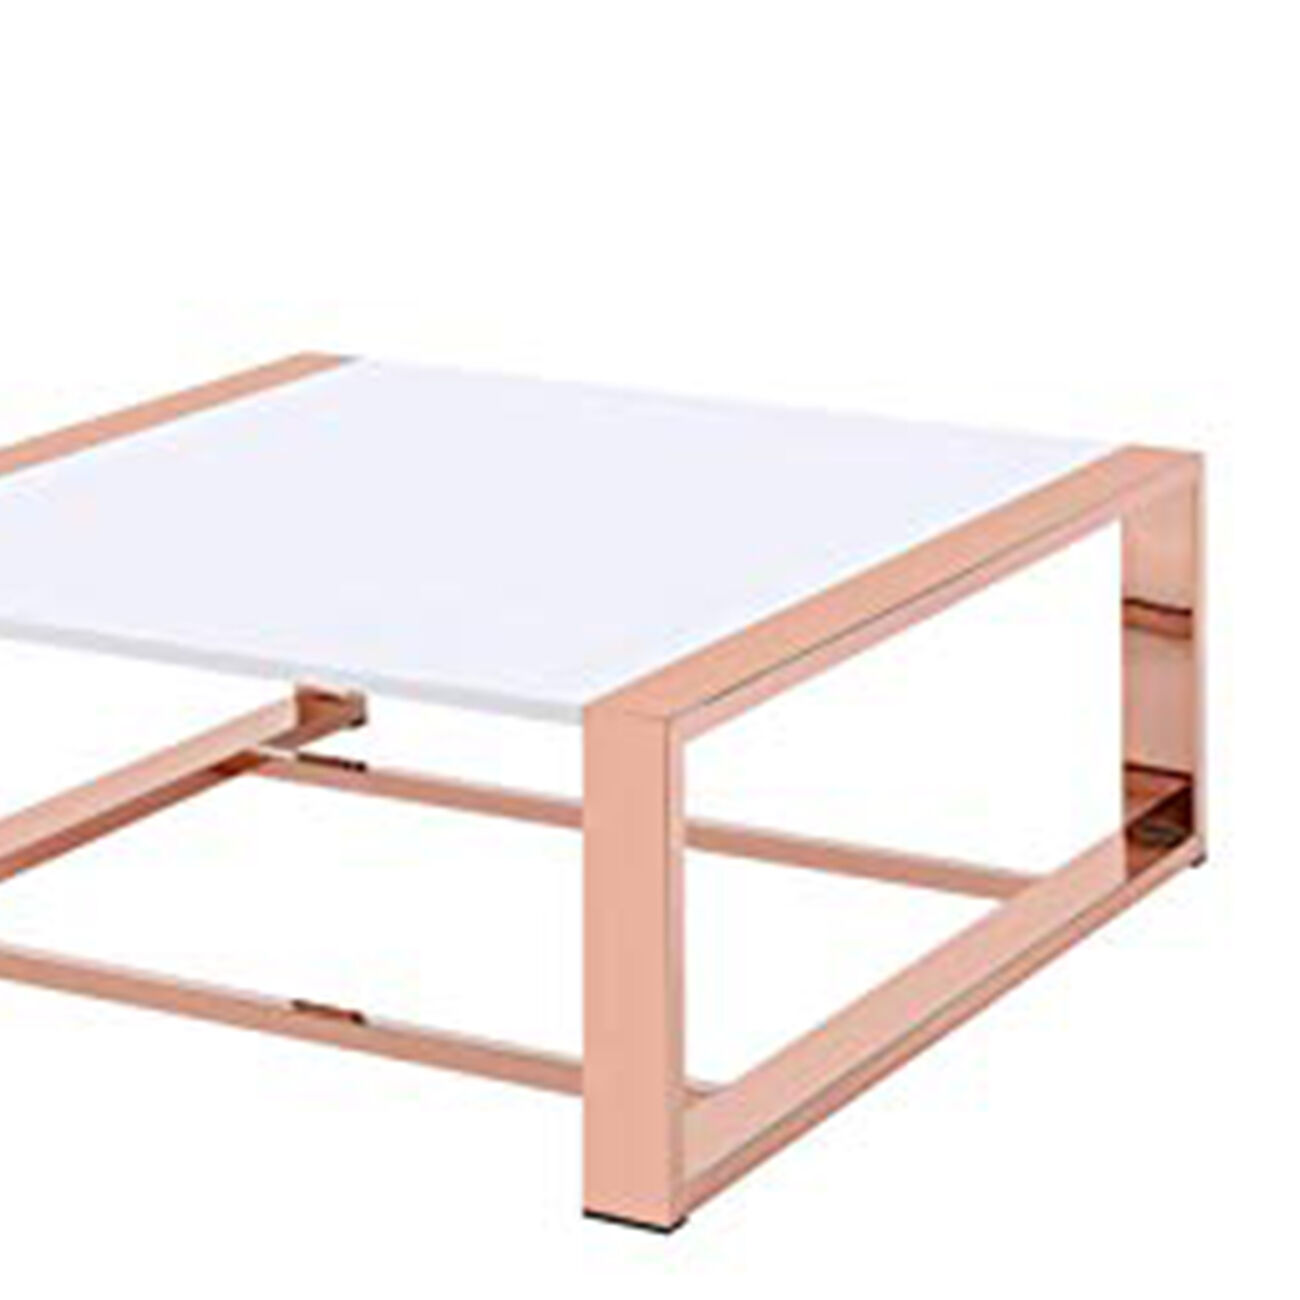 Metal Frame Rectangular Coffee Table with Sled Base, Rose Gold and White